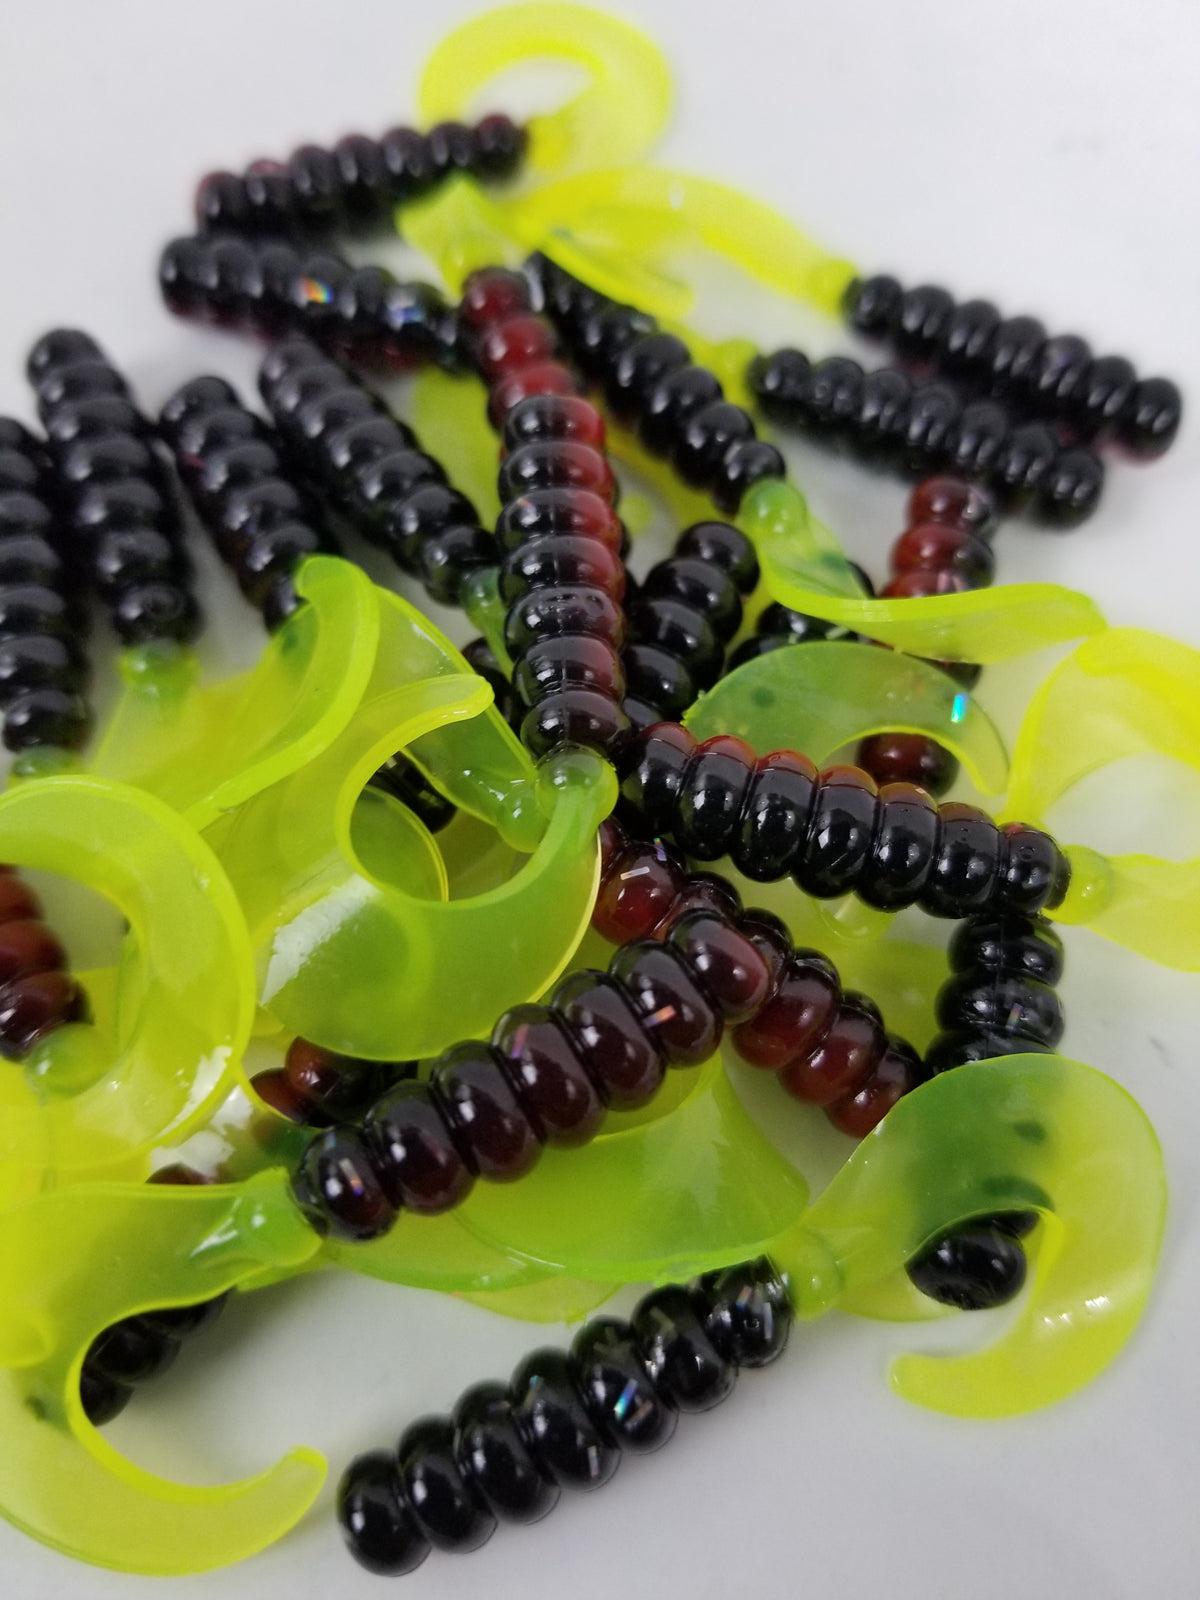 2023 Cam's 2"(HOLOGRAM FLAKE)  Curly Tail Grub 40pc Red Black & Chartreuse Curly Tail Crappie Soft Jigs  [A Cam's Exclusive]